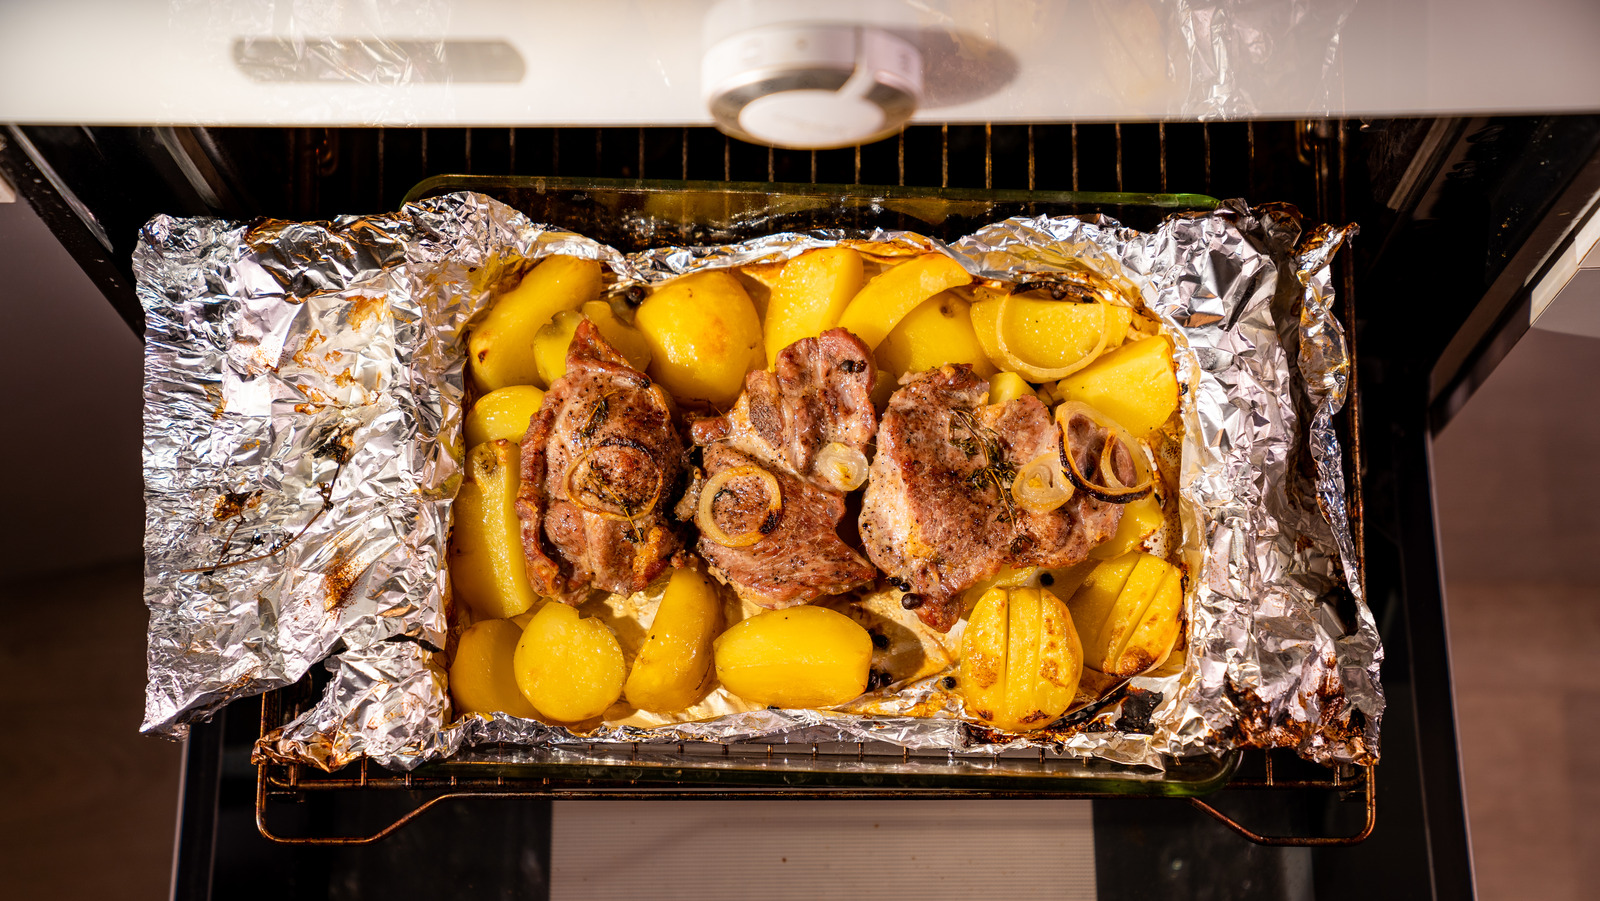 https://www.tastingtable.com/img/gallery/why-you-shouldnt-worry-if-aluminum-foil-discolors-in-the-oven/l-intro-1698188716.jpg